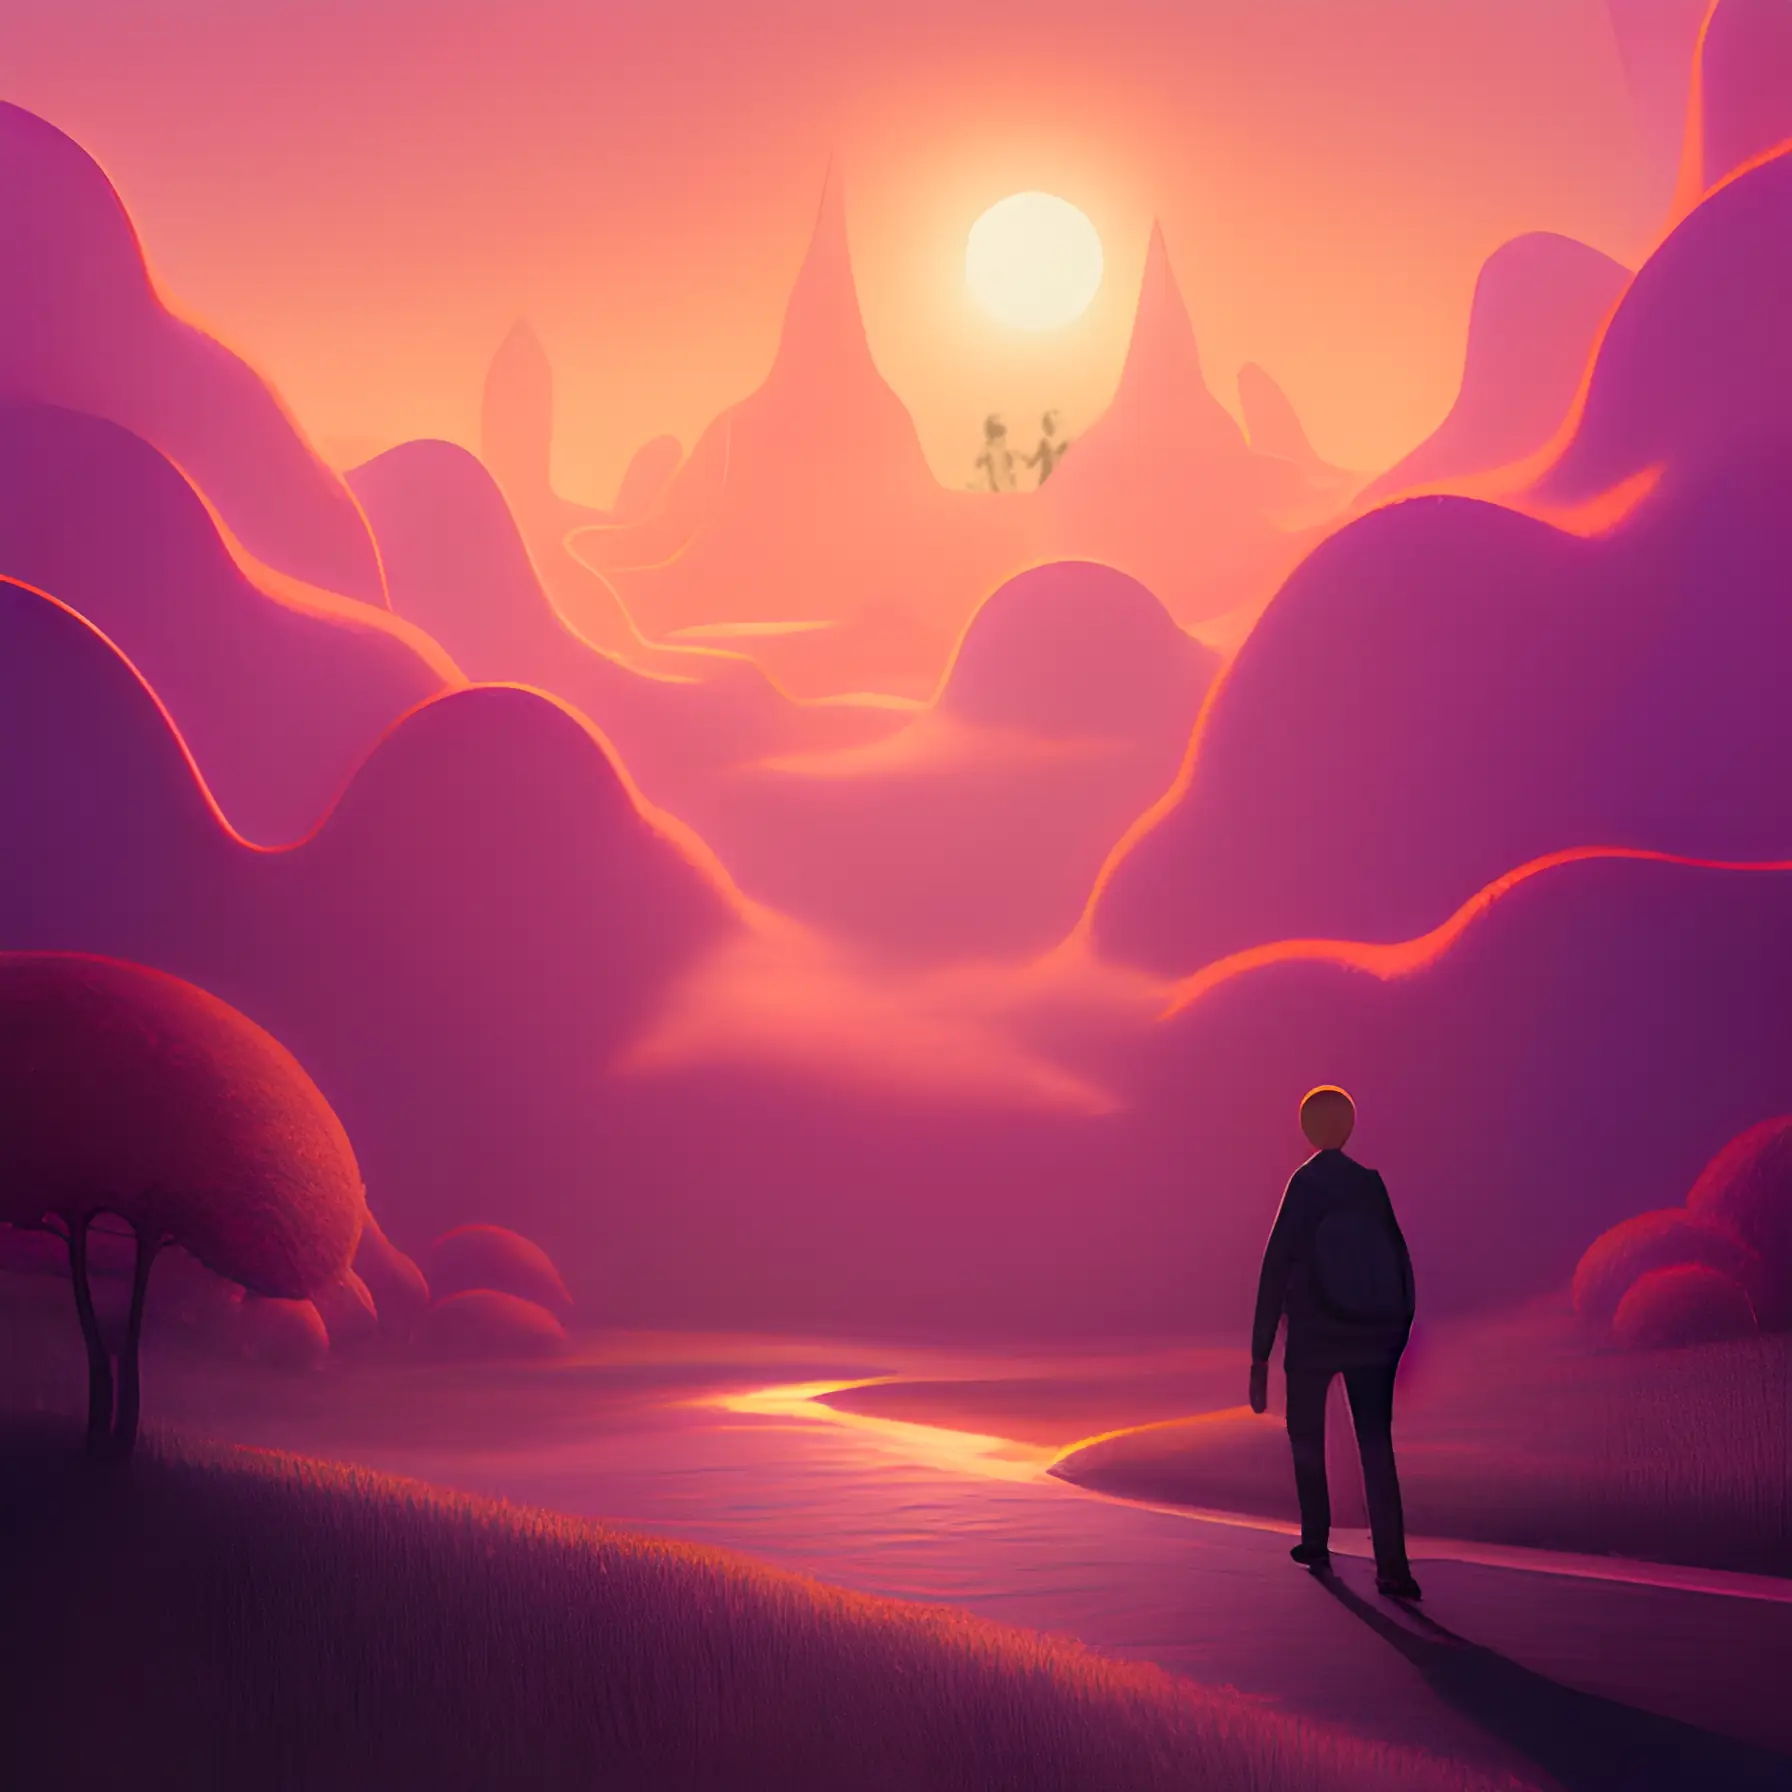 A purple-red-orange hued rendering of a lone figure walking down a road toward the sun setting behind mountains.